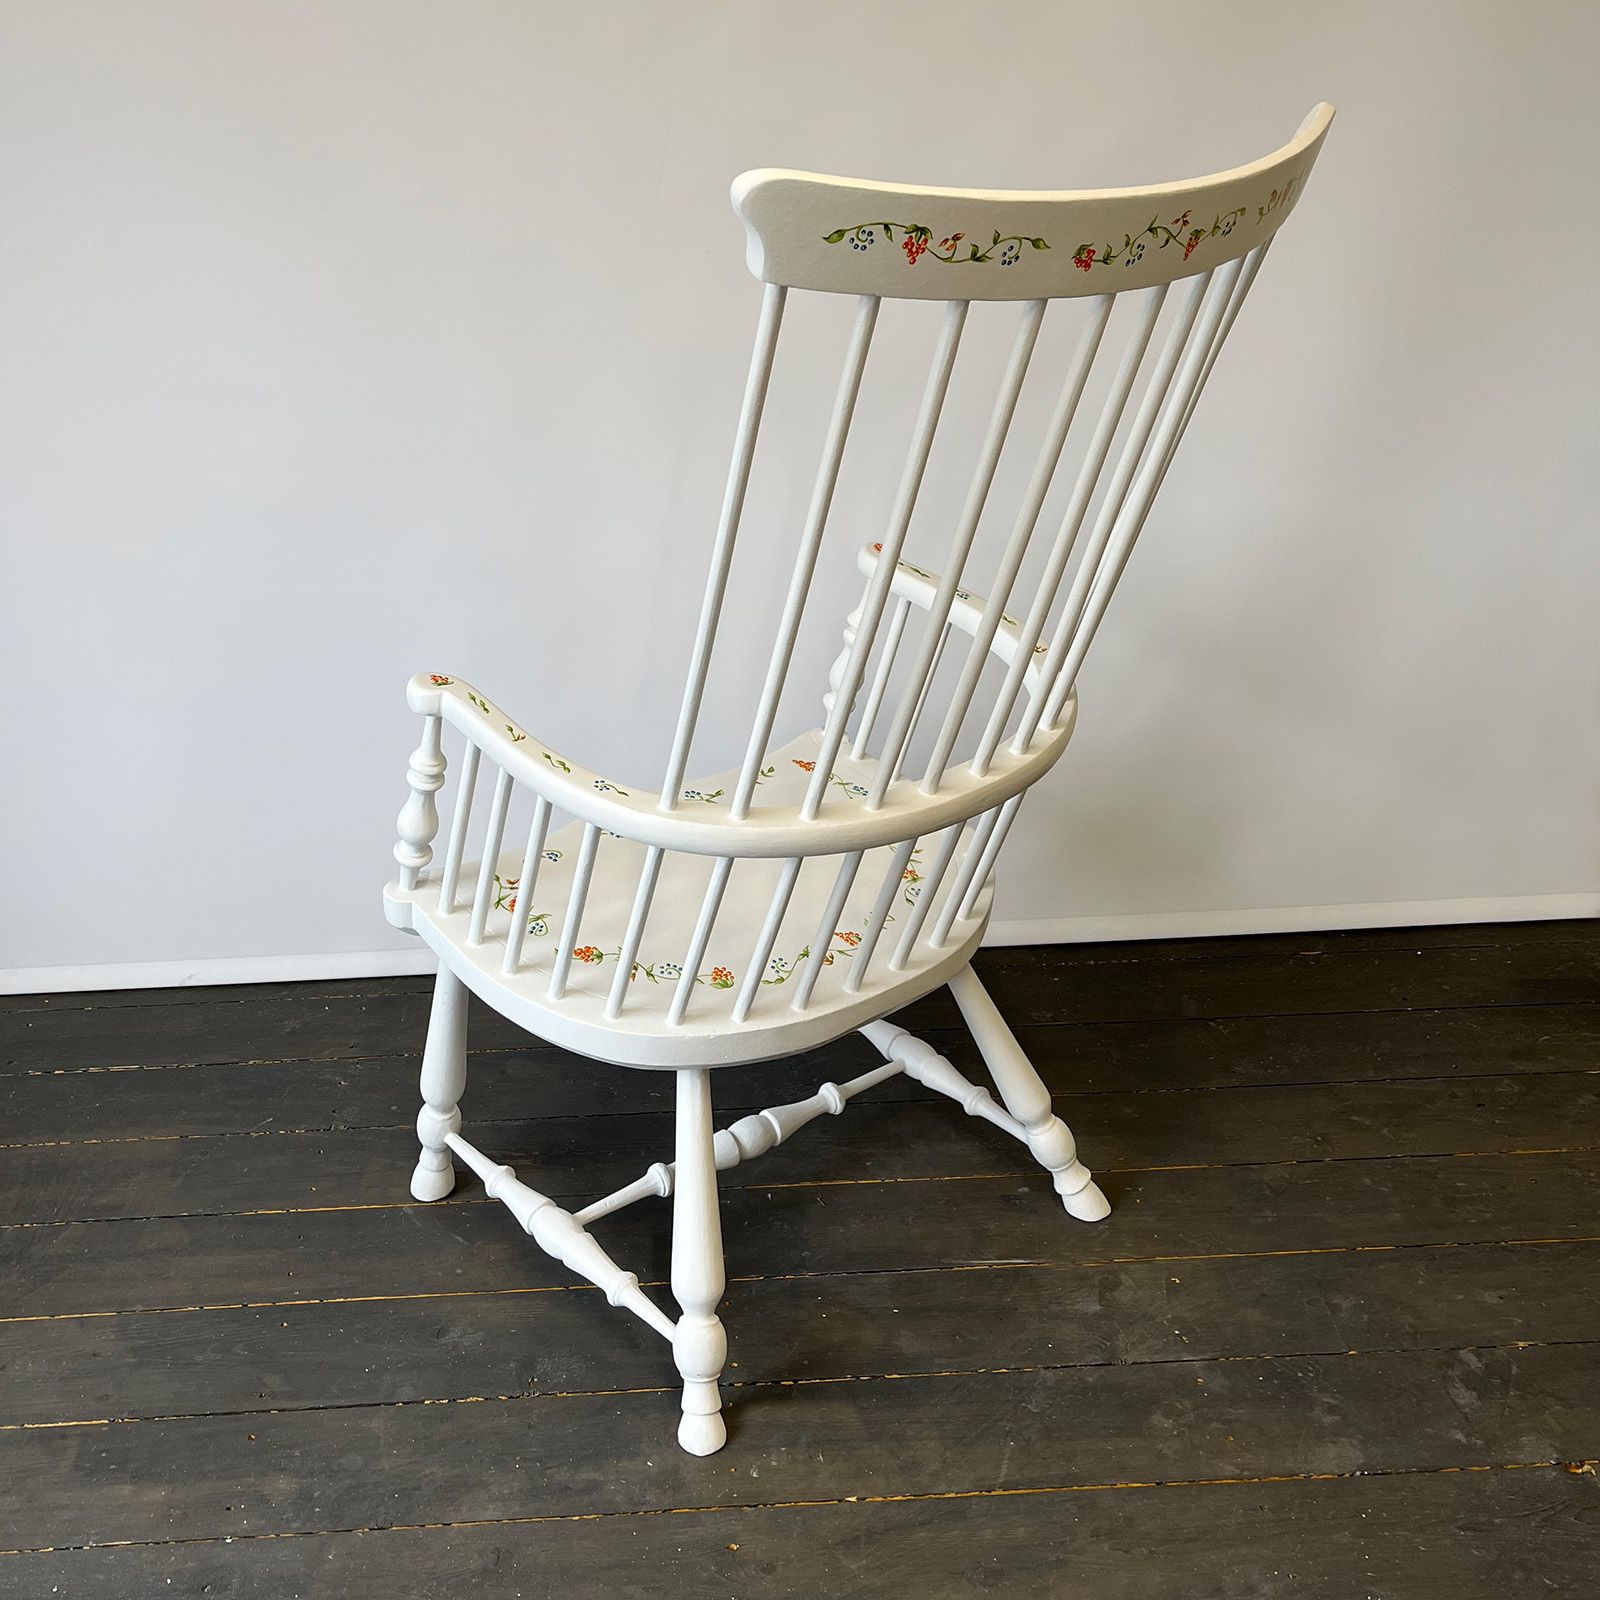 Upcycled  Windsor chair back with berry design